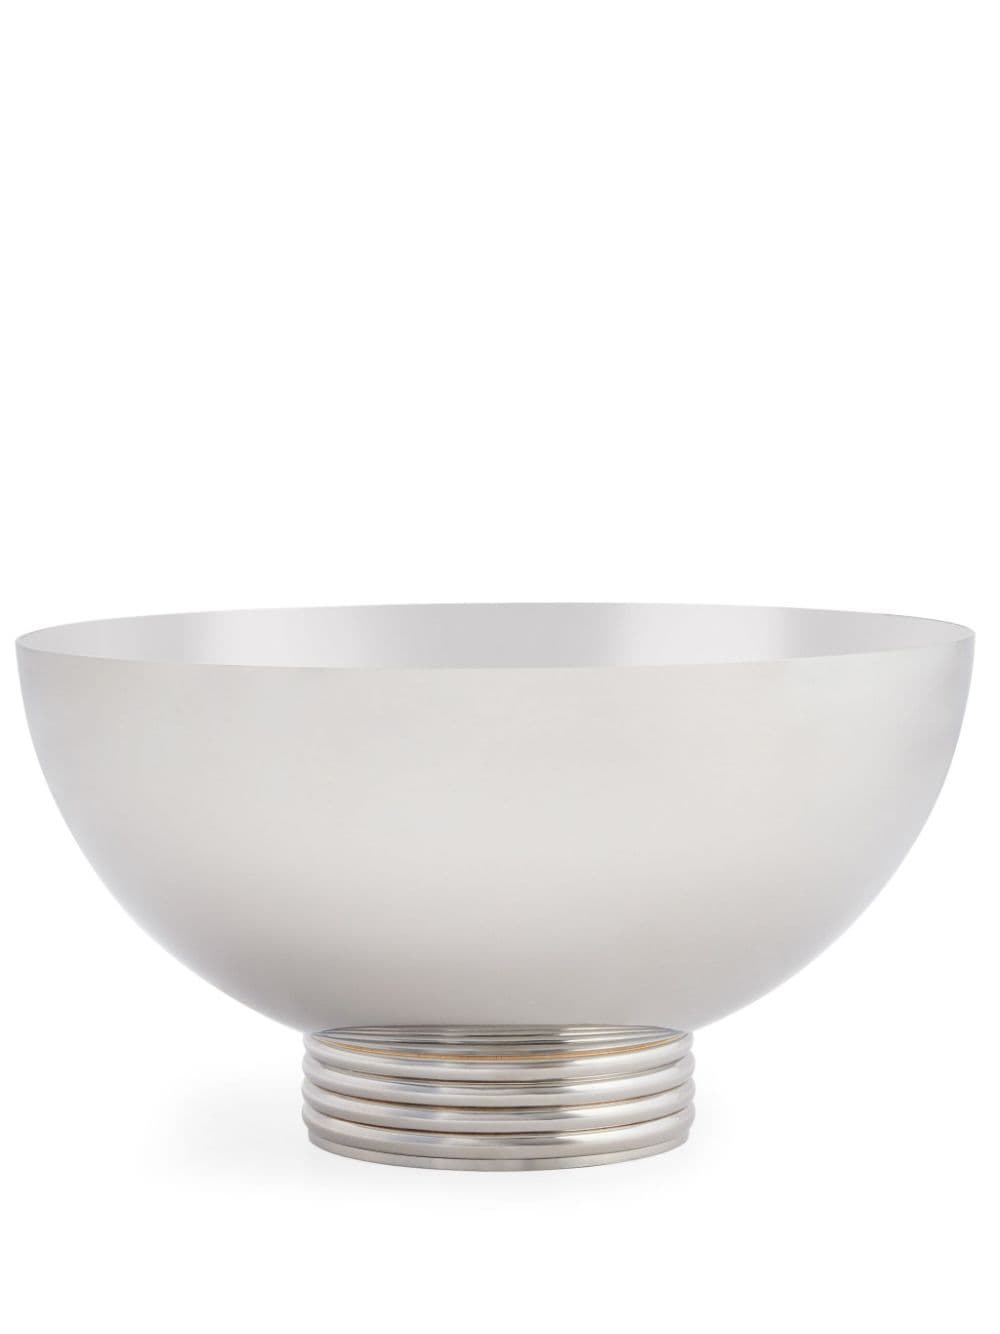 Image 1 of Ralph Lauren Home Thorpe stainless-steel fruit bowl